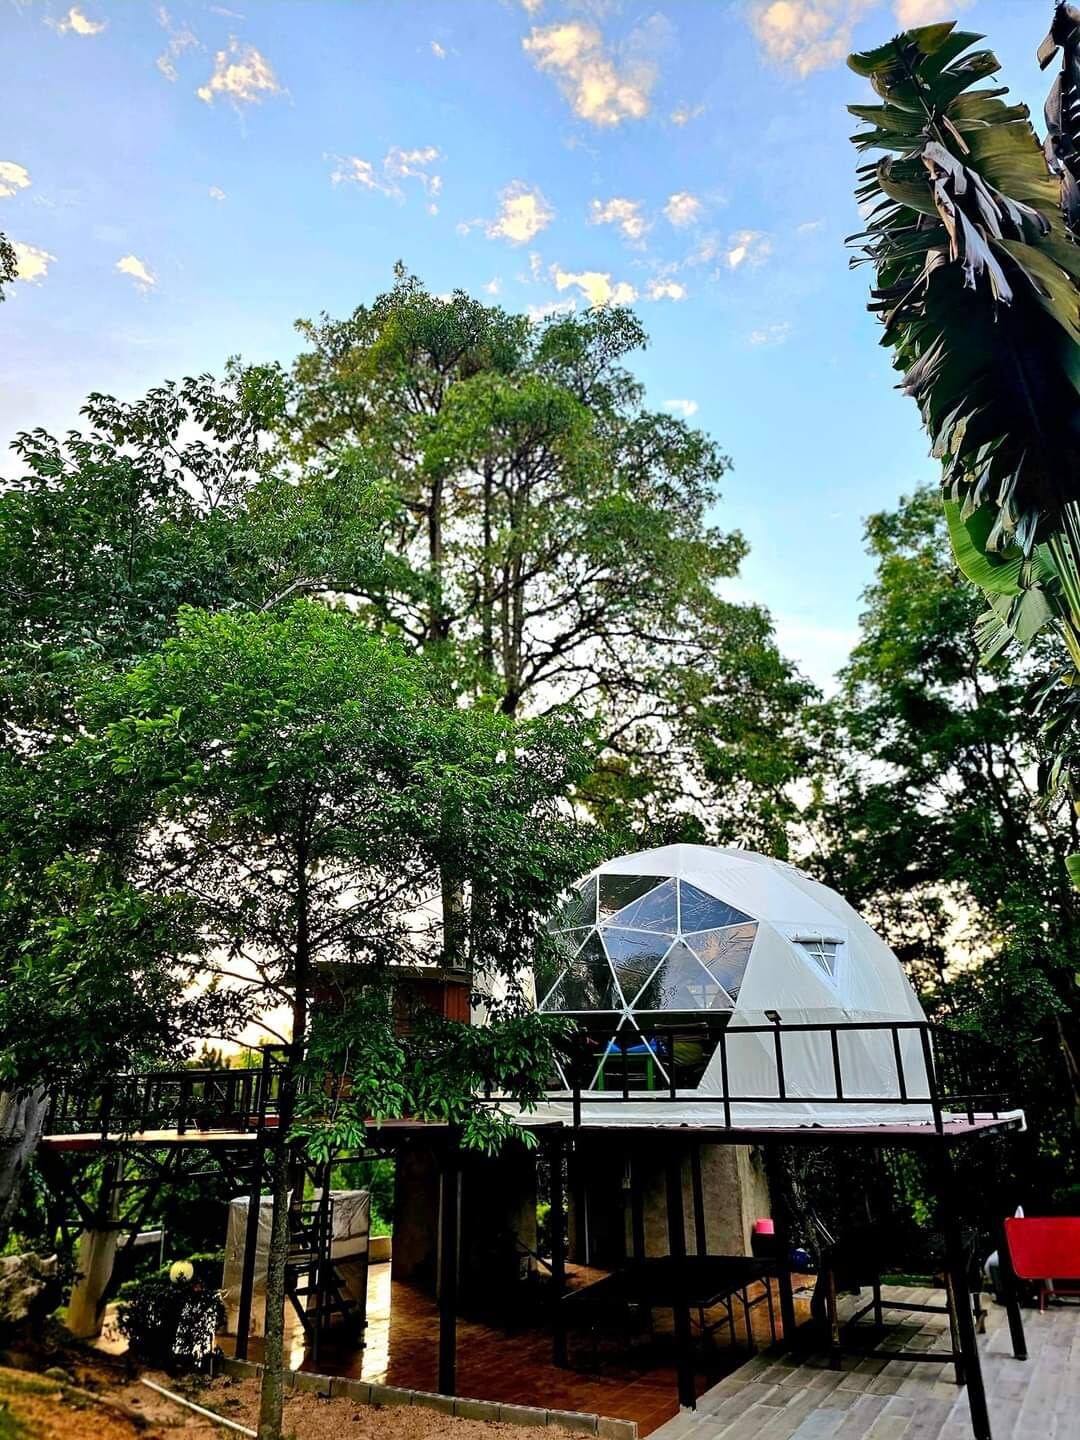 The Mountain Dome At Treehouses